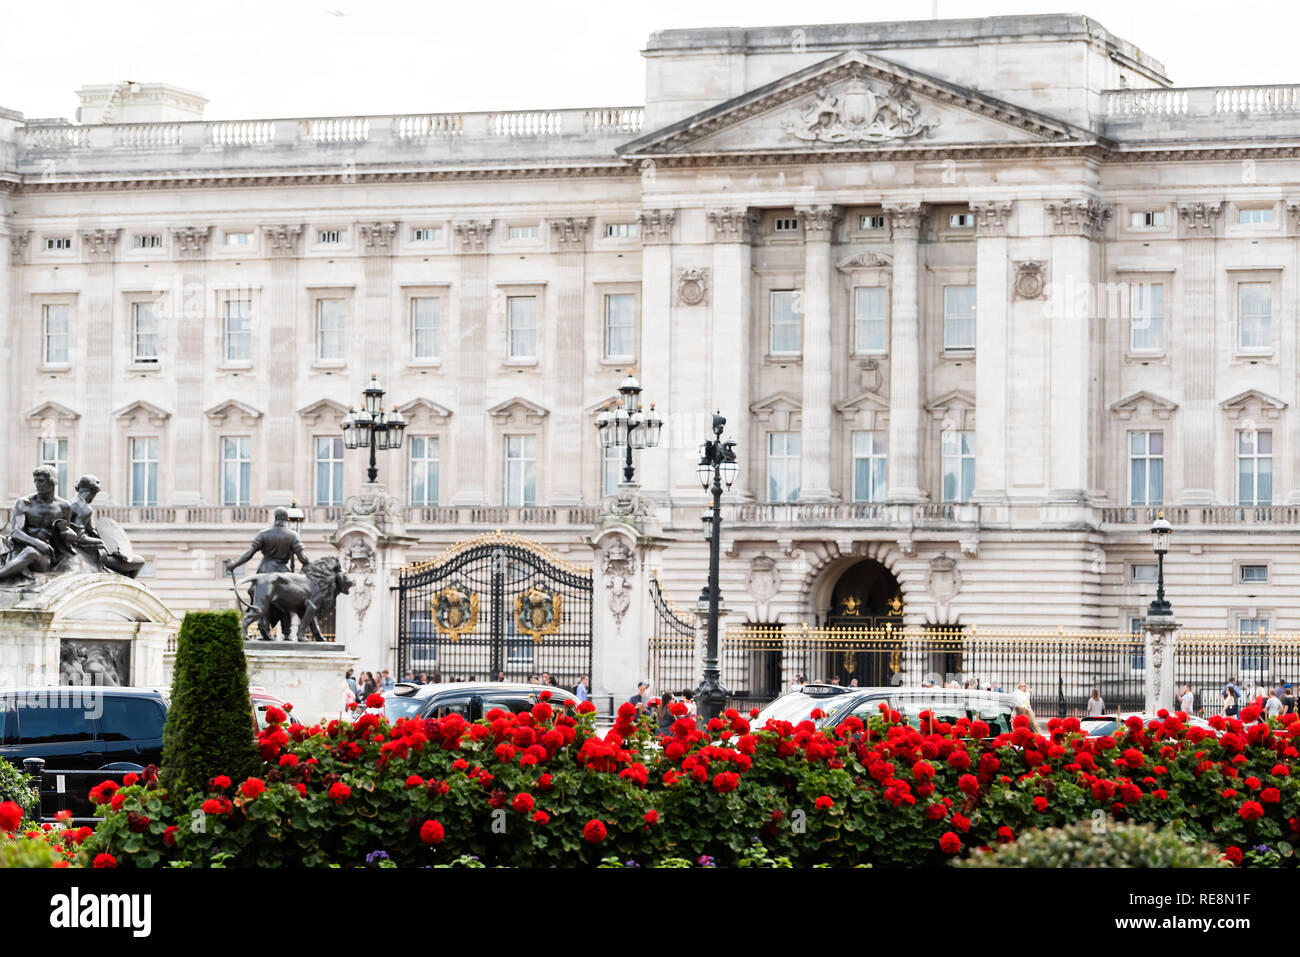 London, UK - June 21, 2018: Buckingham Palace fence gate architecture building during summer day with cars in traffic and red rose flower landscaped g Stock Photo